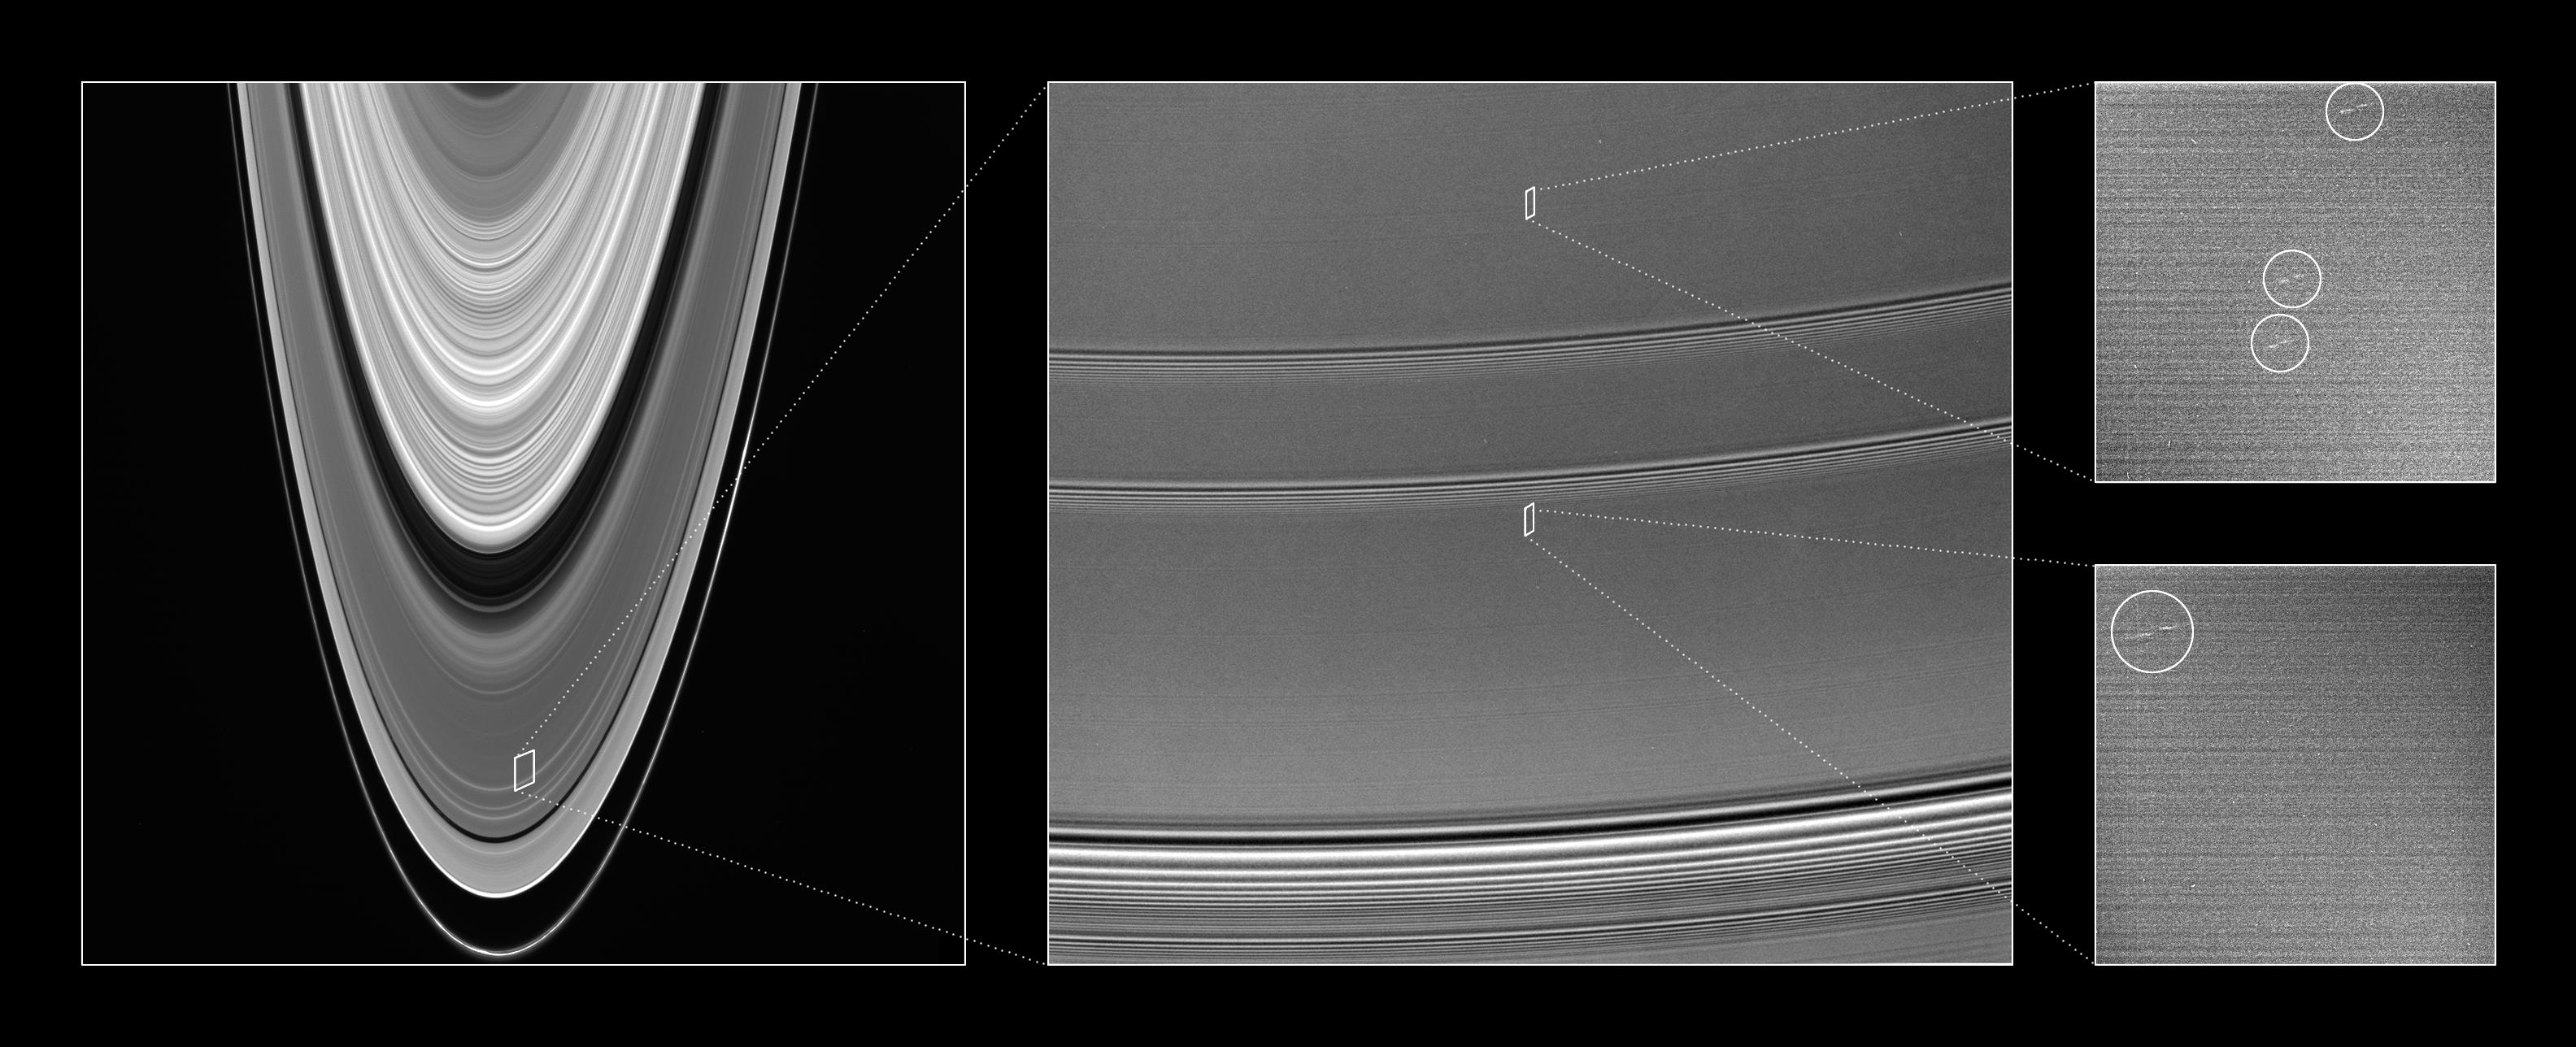 A collection of images showing location and scale of propeller-shaped features observed within Saturn's A ring